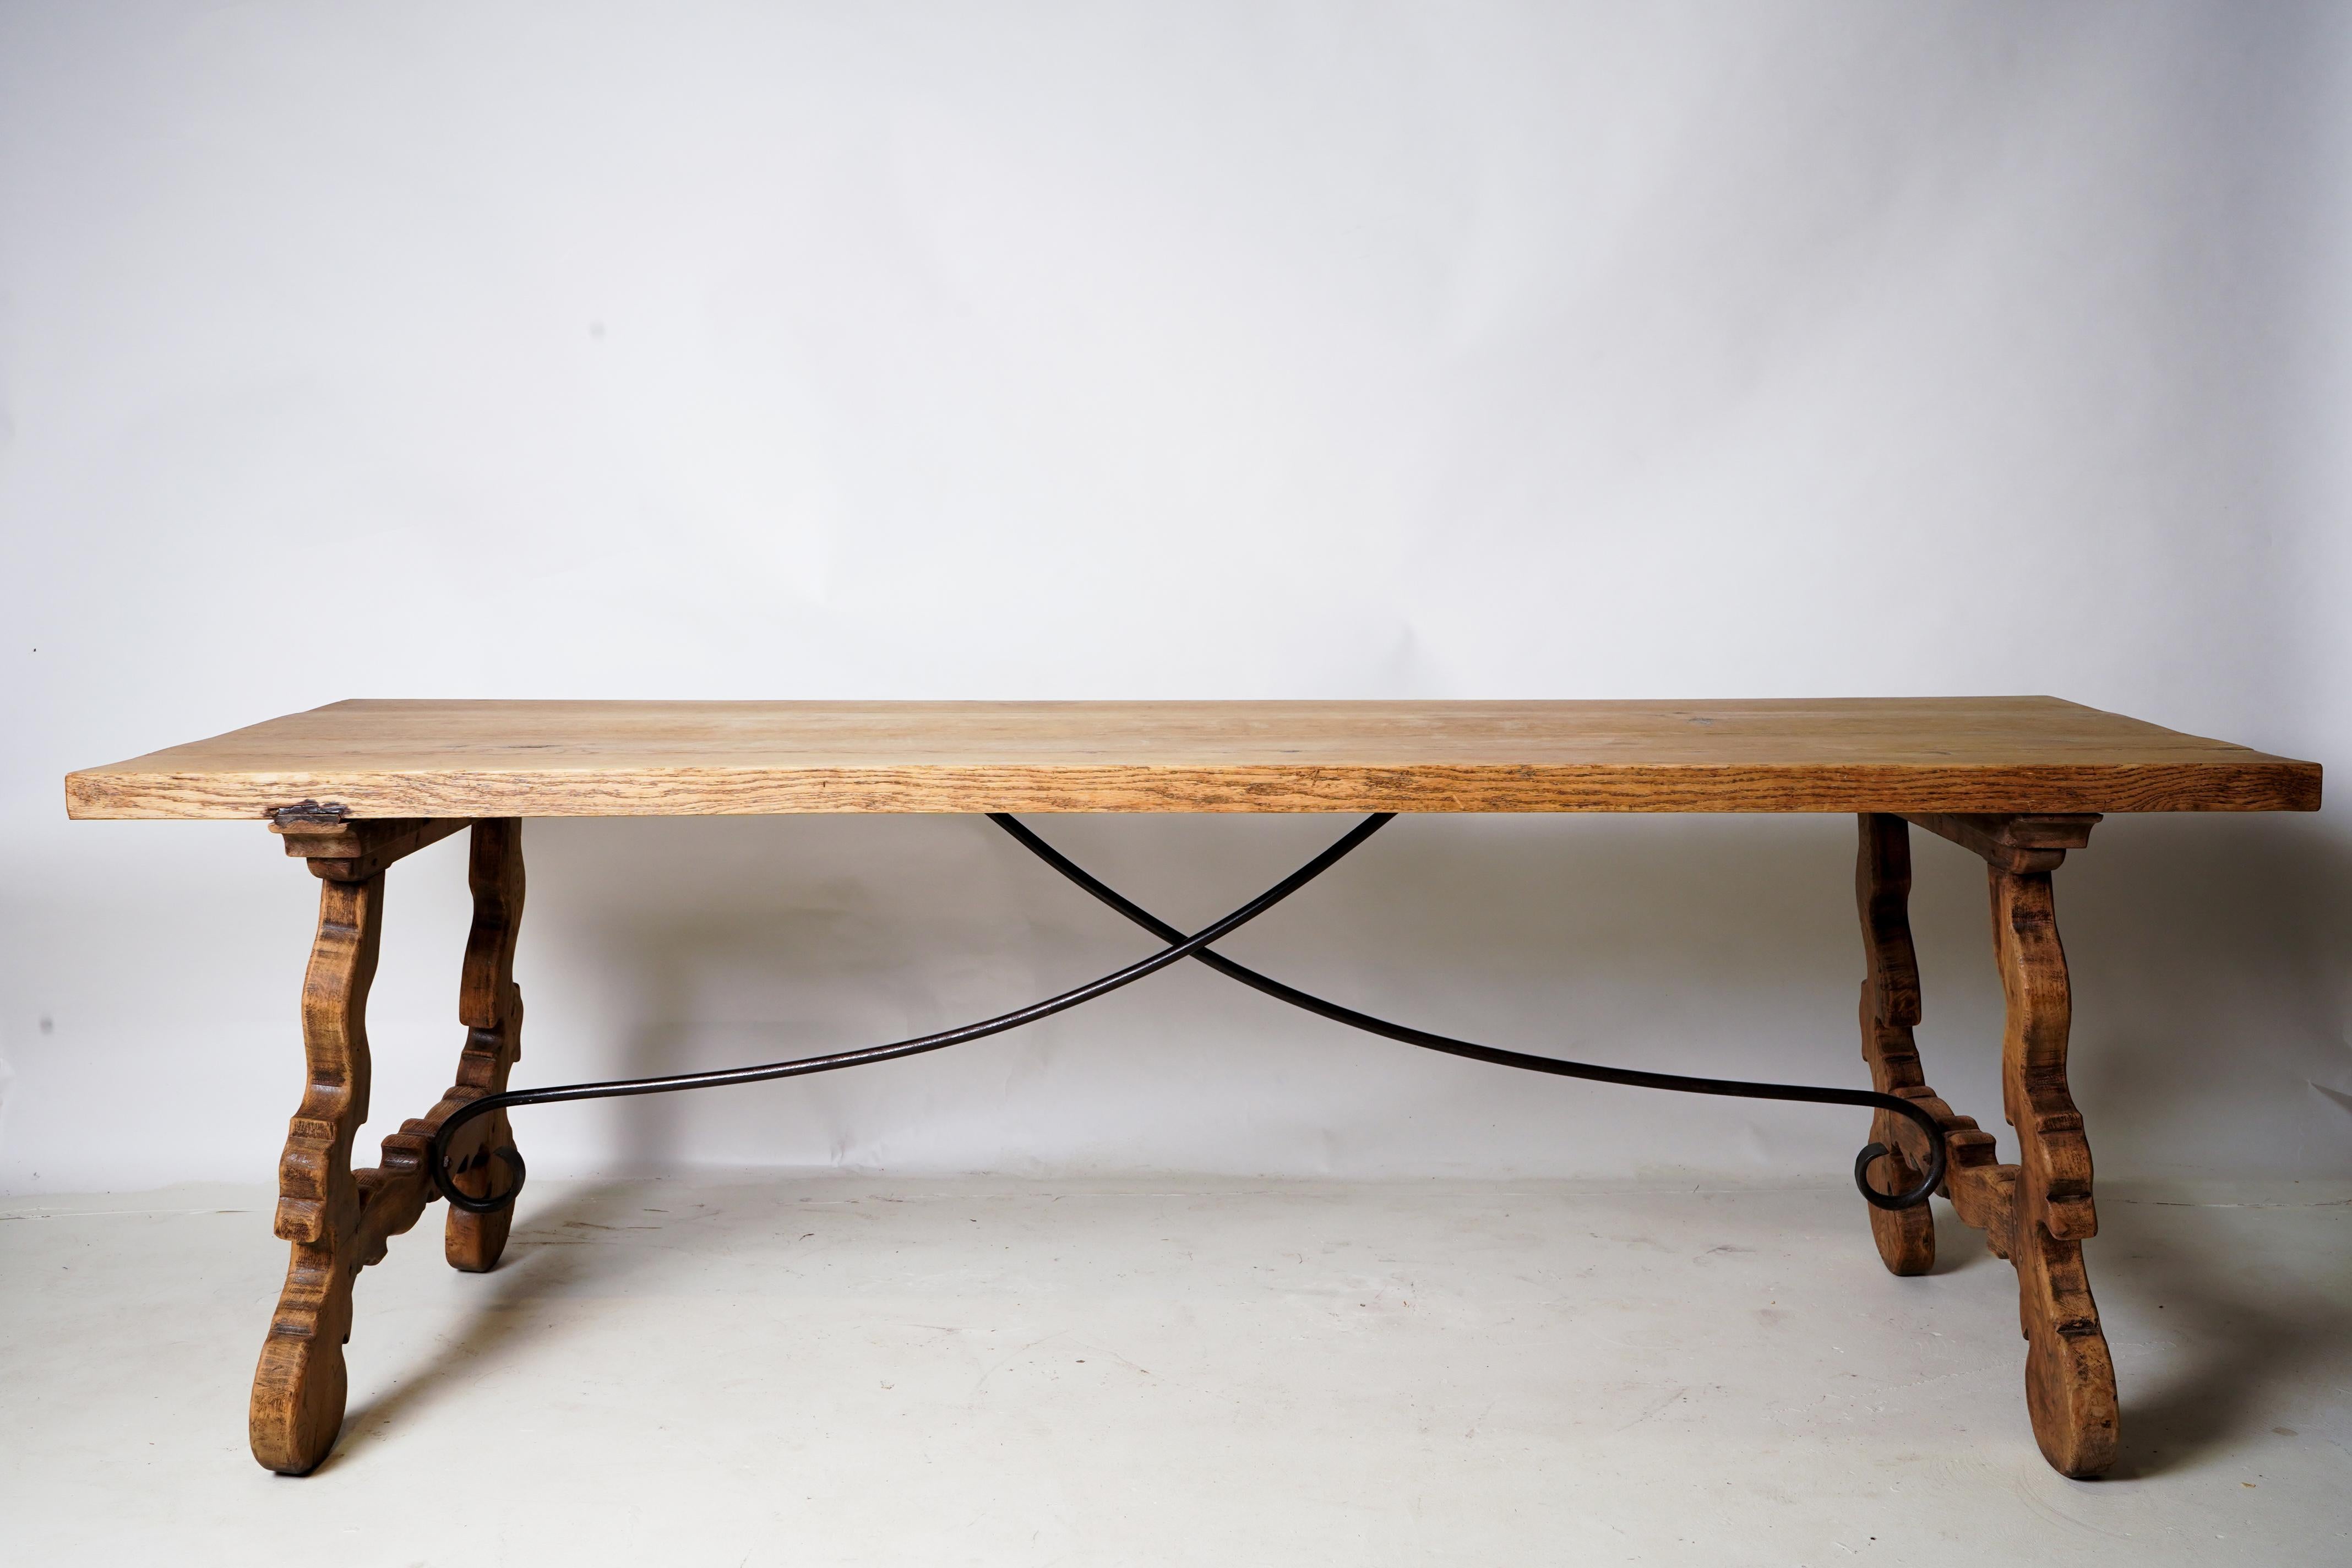 This extremely sturdy Oak table is made in the Spanish Baroque style, with elaborately carved legs and had-forged iron braces running from the center of the table top to each leg. The 2